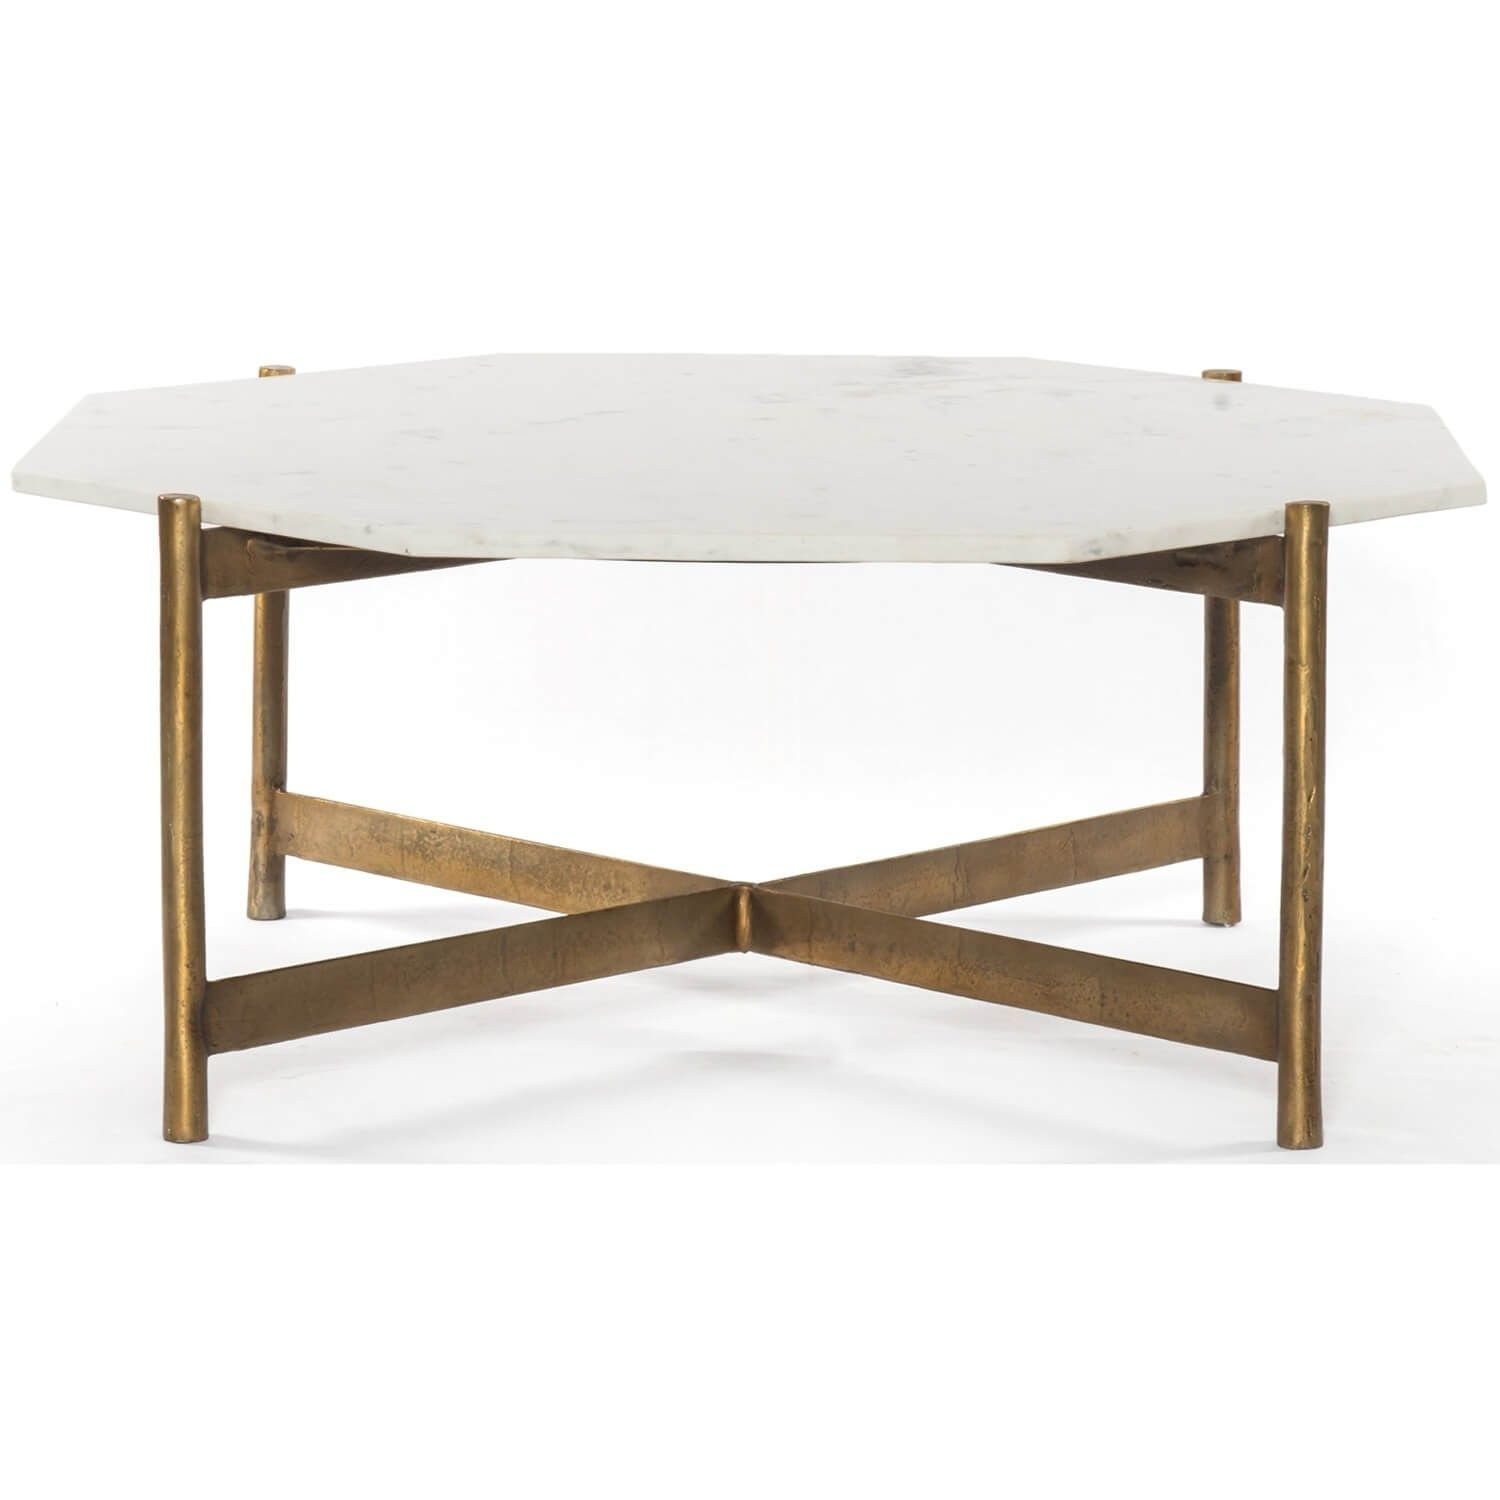 Adair Coffee Table, Raw Brass – Coffee Tables – Accent Tables With Regard To Slab Large Marble Coffee Tables With Brass Base (View 7 of 30)